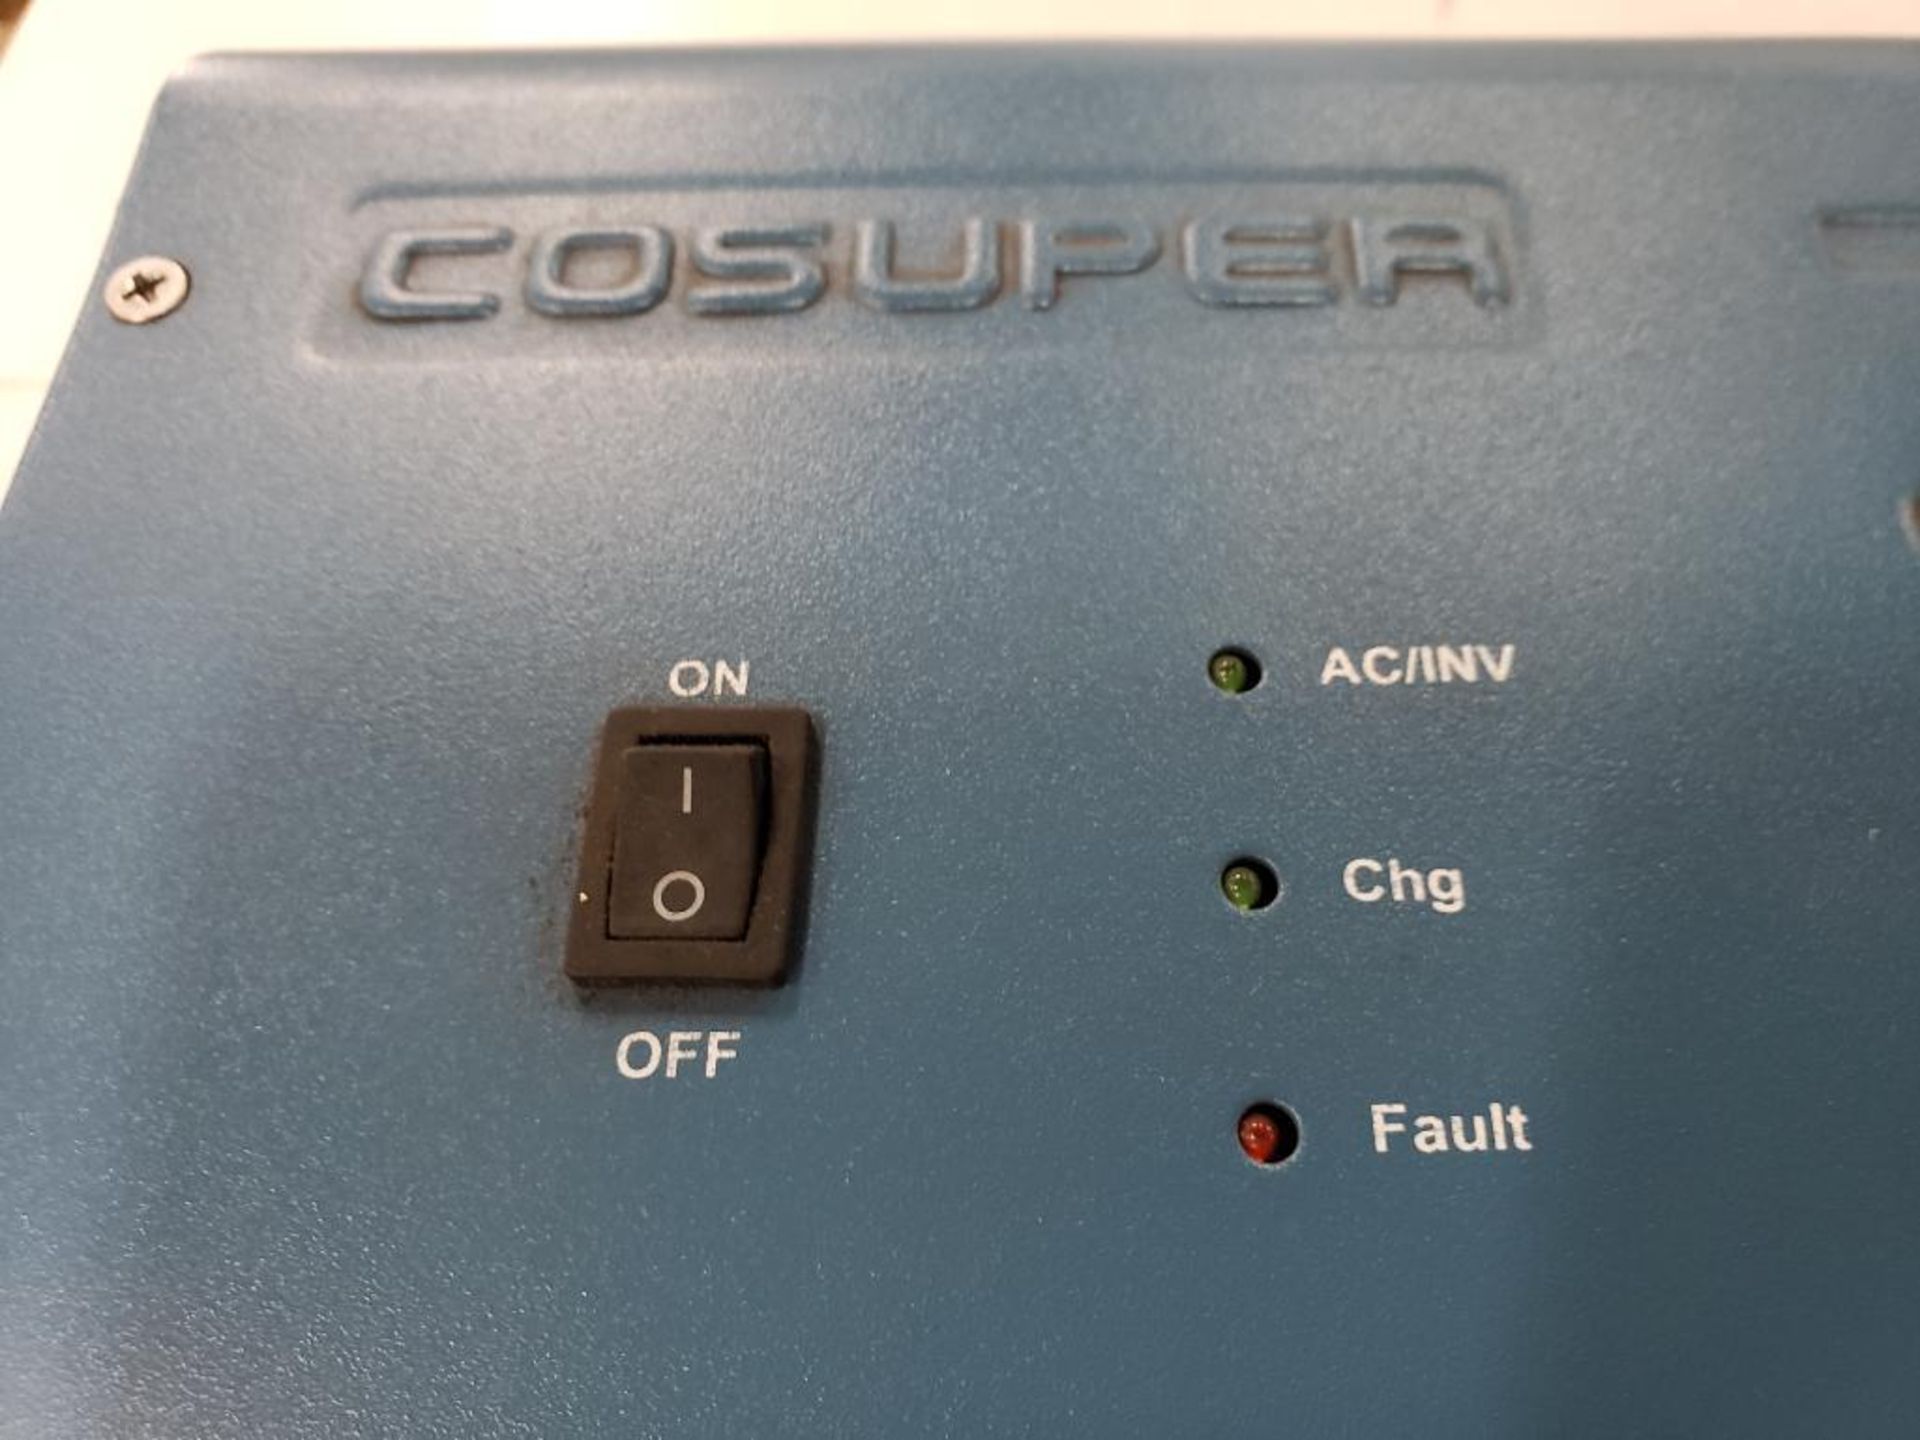 COSUPER 3000W pure sine wave inverter charger GMC3000-112. - Image 2 of 5